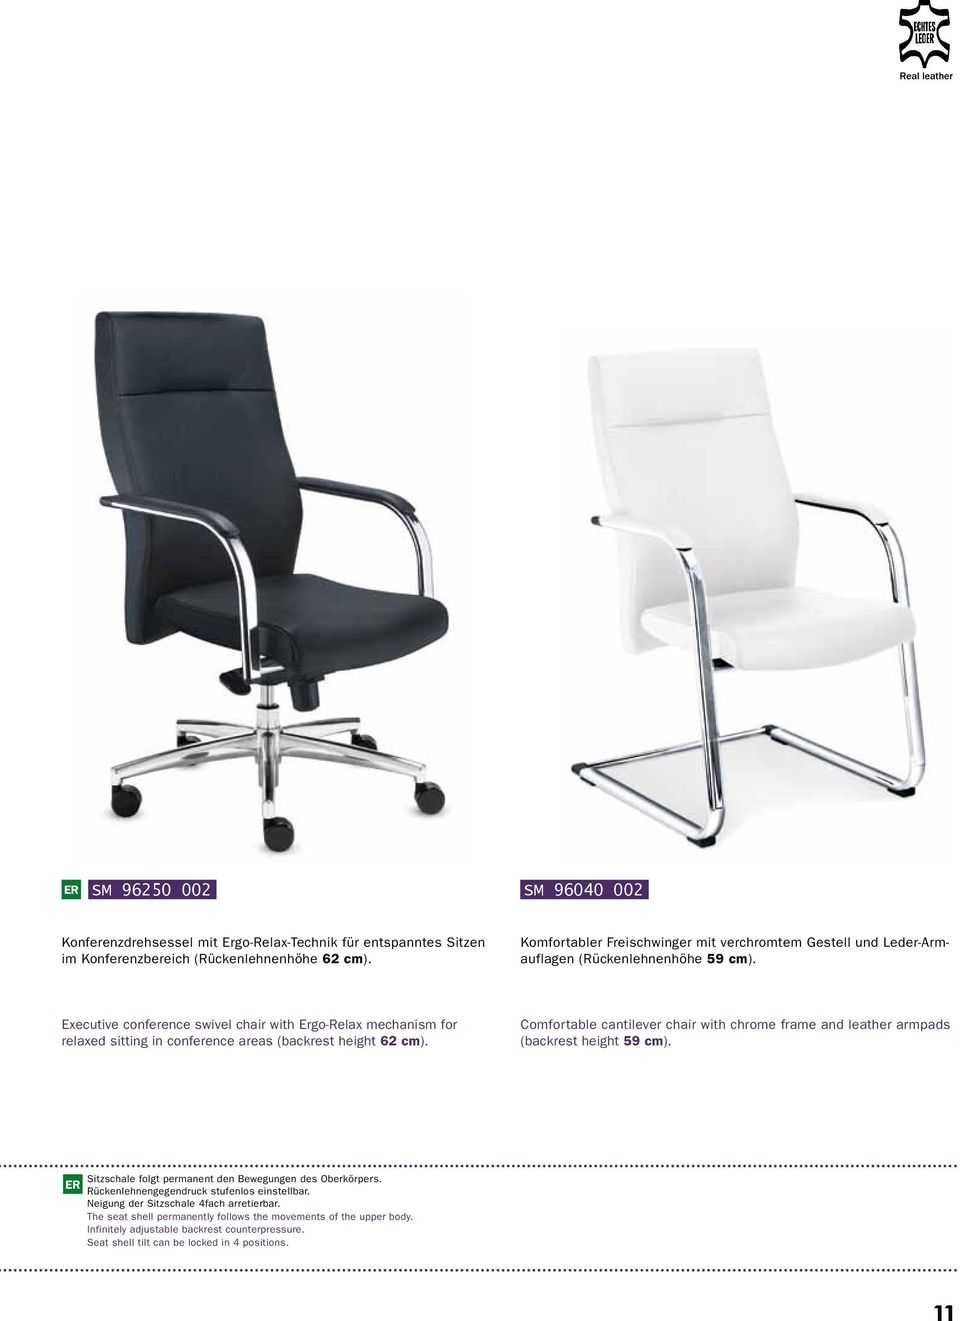 Executive conference swivel chair with Ergo-Relax mechanism for relaxed sitting in conference areas (backrest height 62 cm).